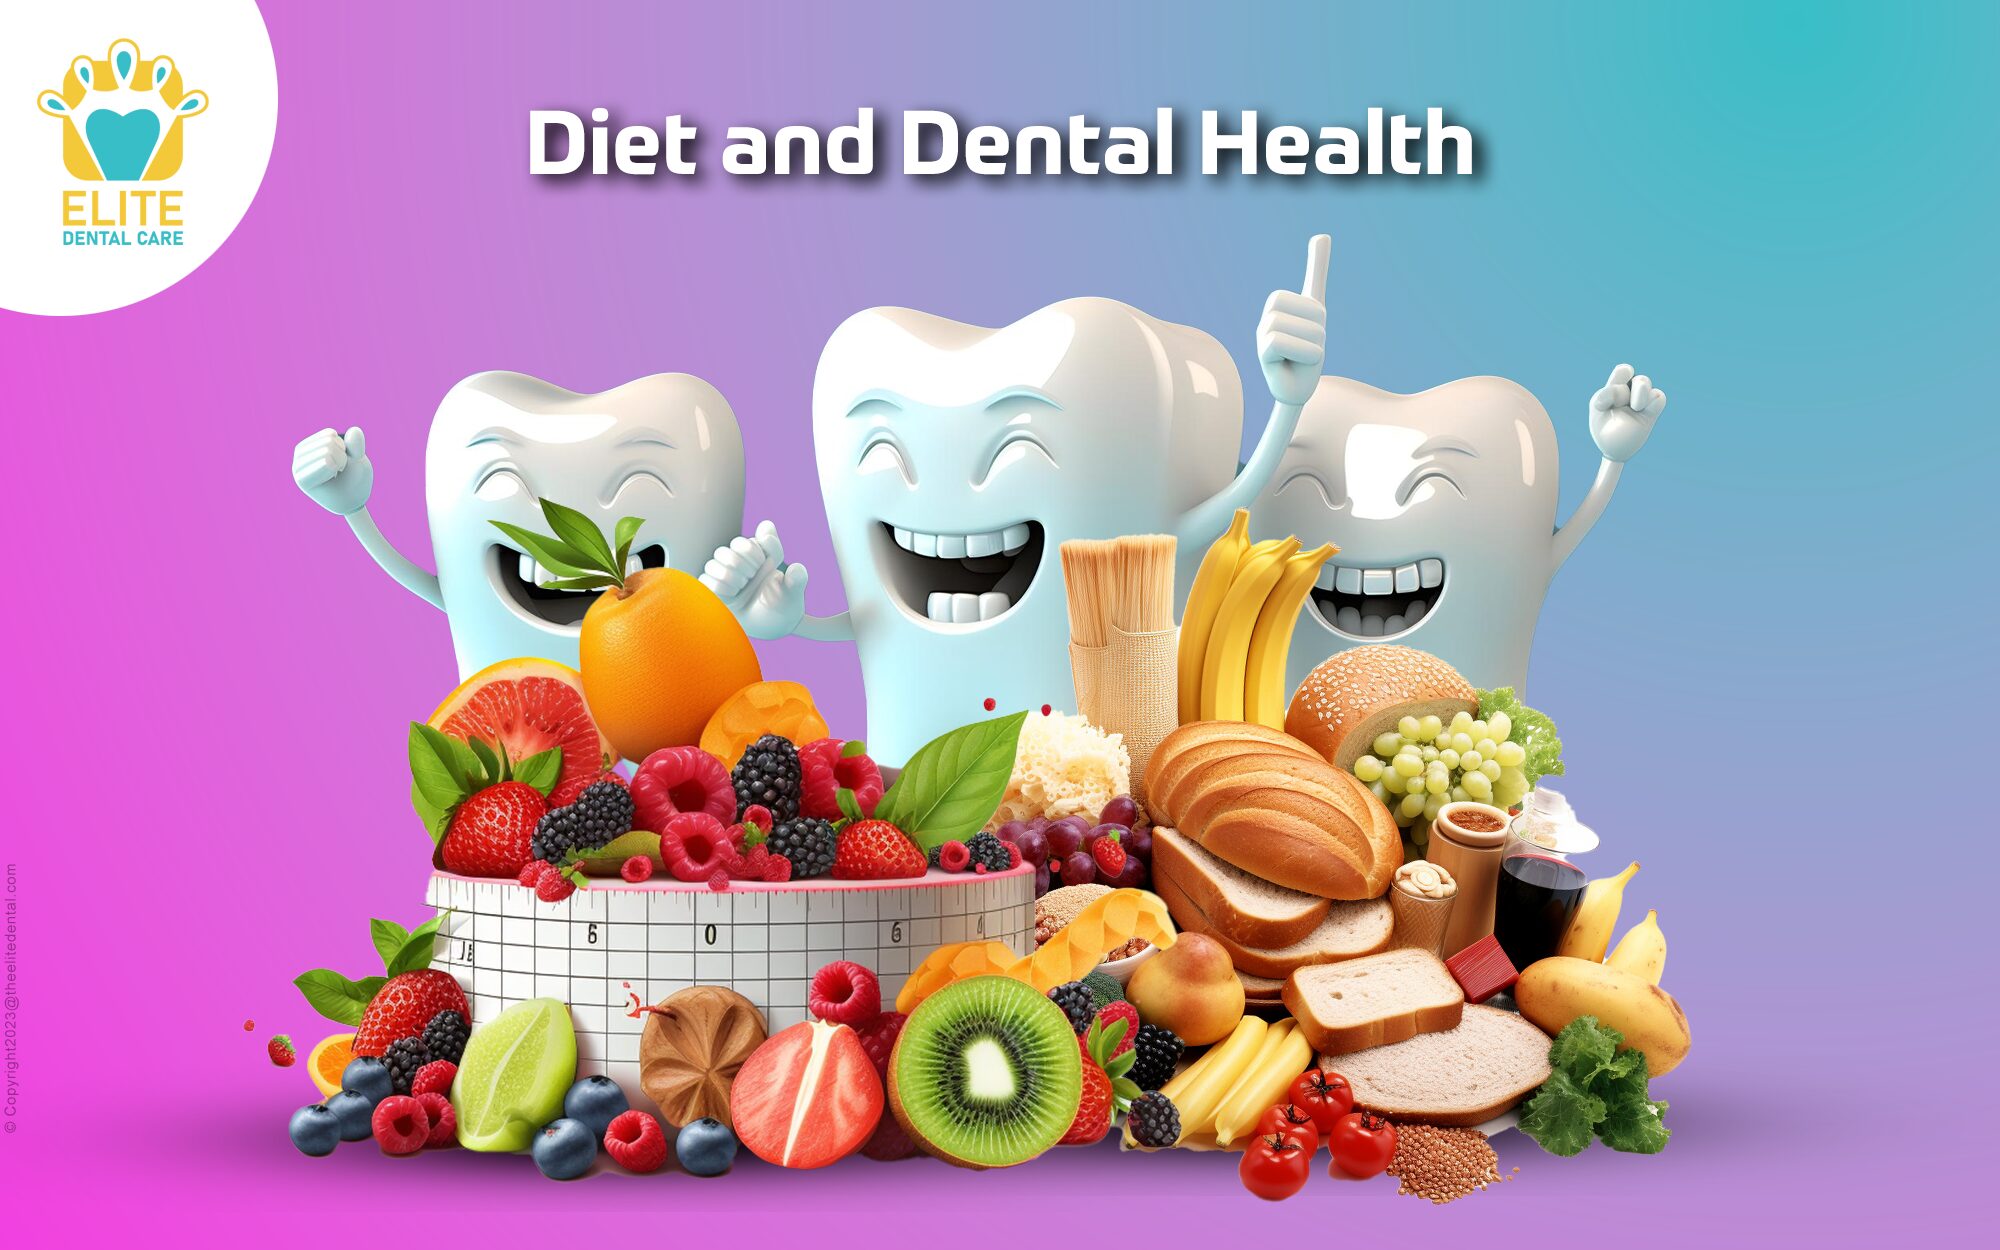 DIET AND DENTAL HEALTH